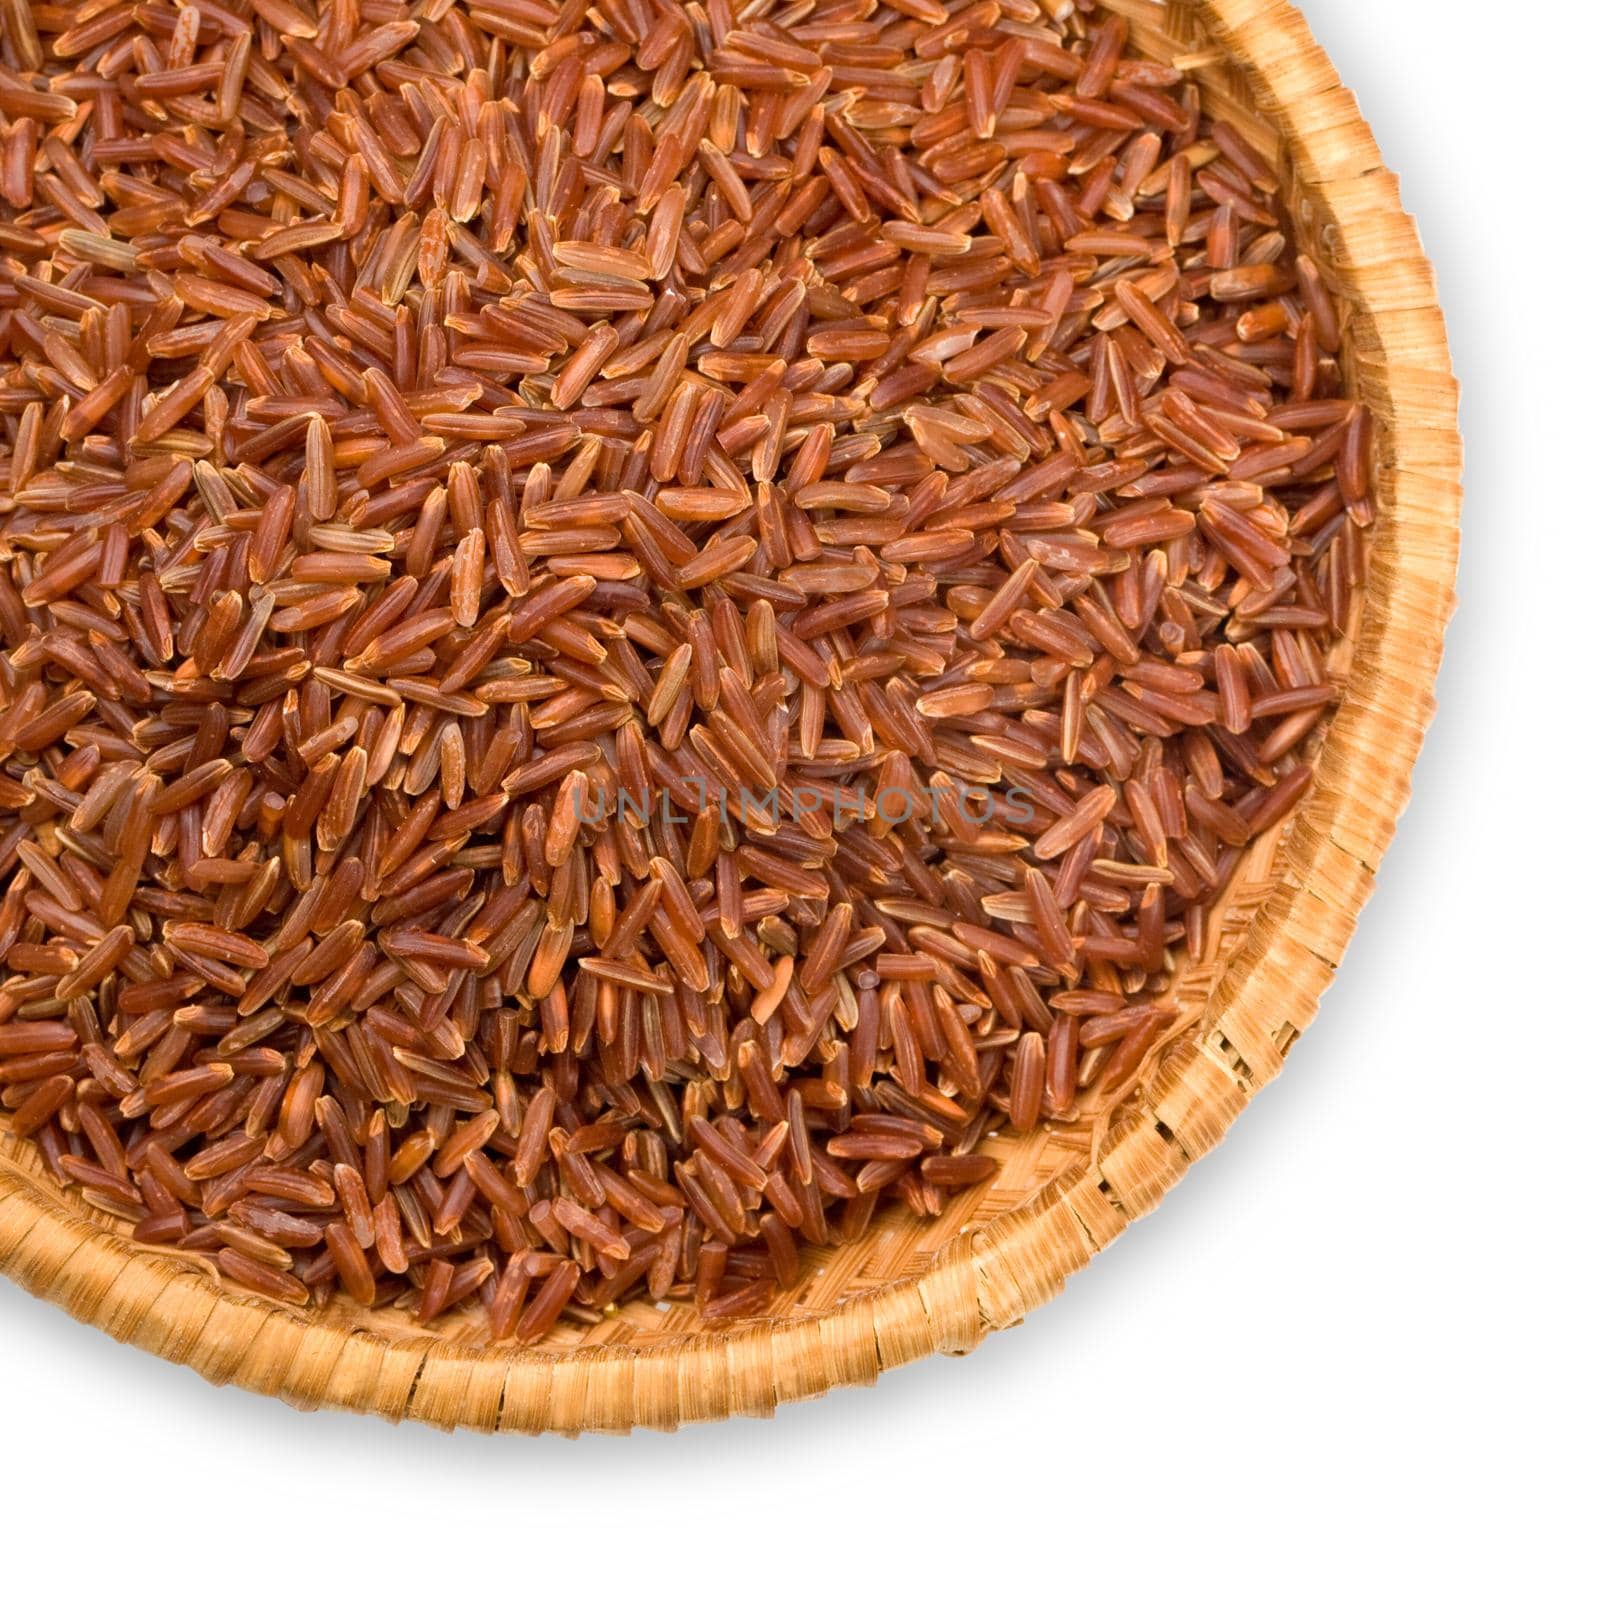  plate with long-grain red rice by kornienko